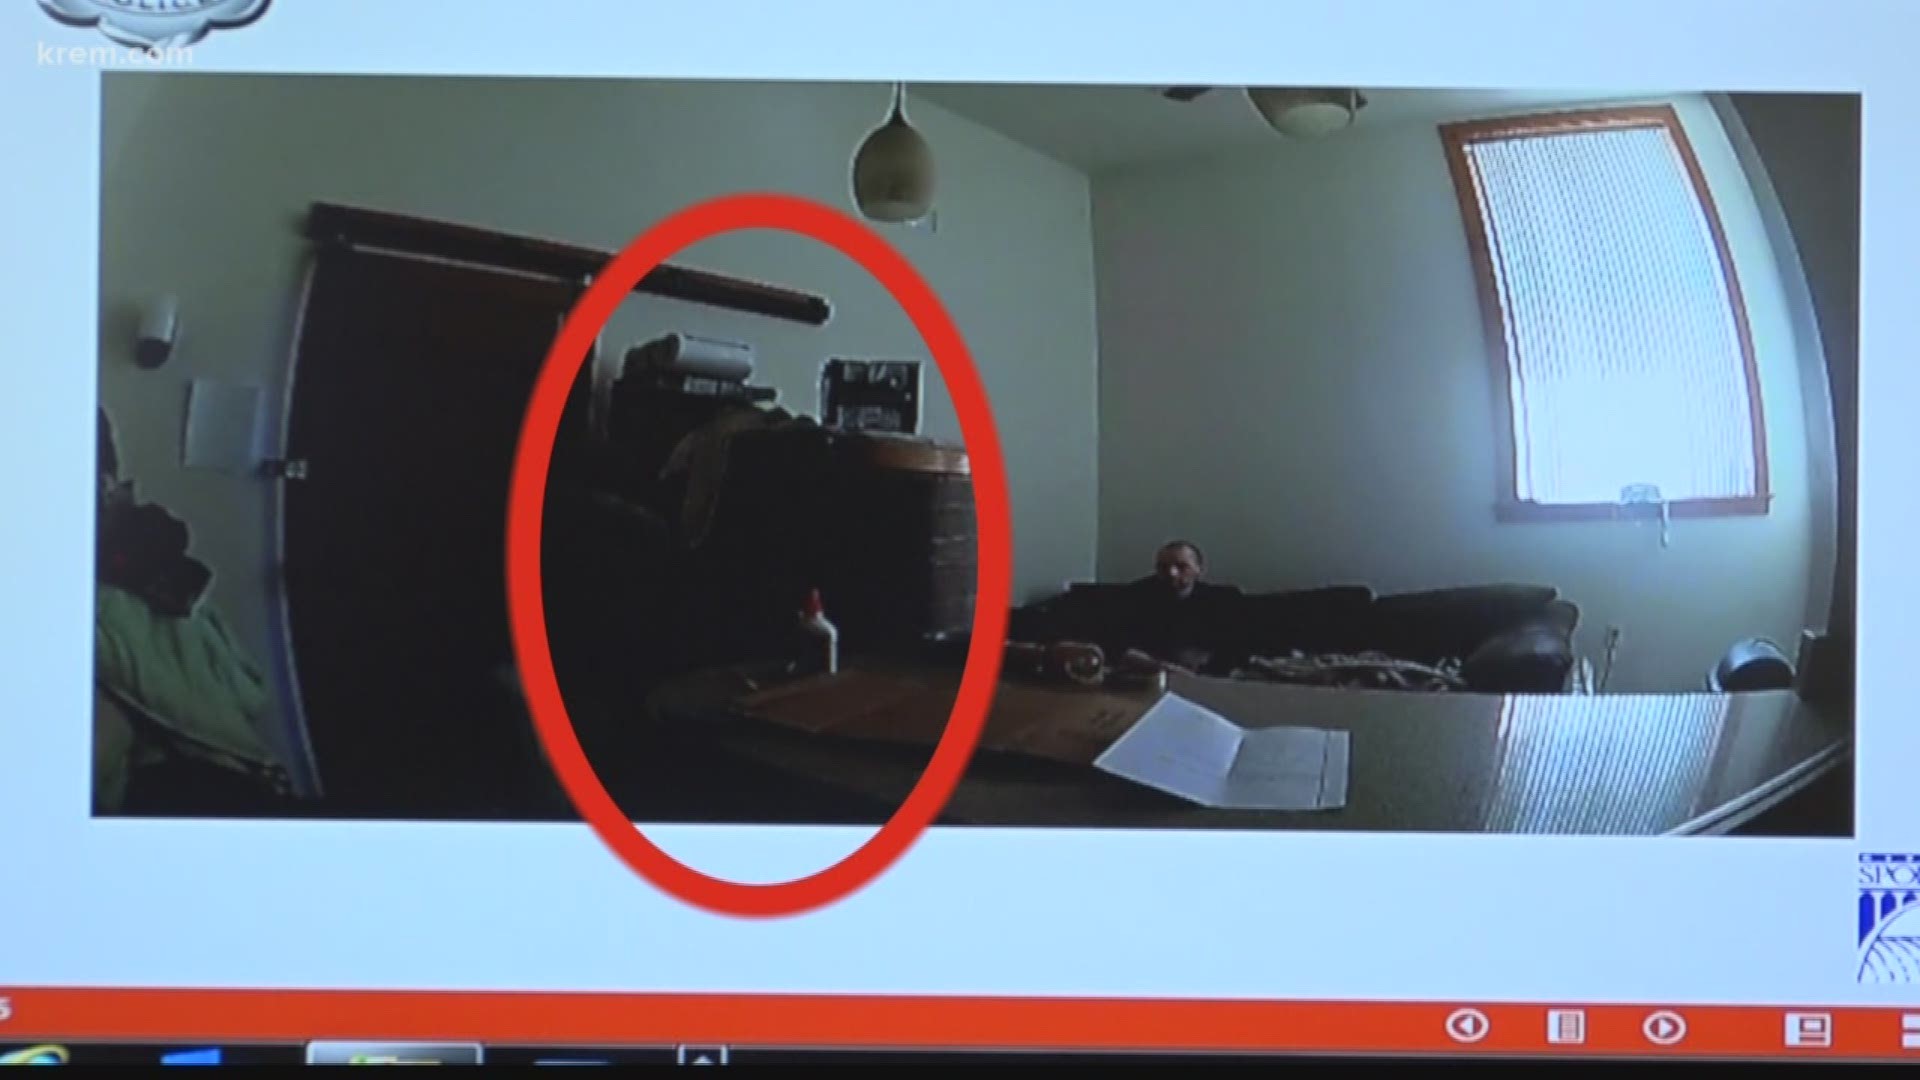 Video shows Ronald Acre sitting on a couch in the back of his apartment. If front of him is another couch that's been propped up.